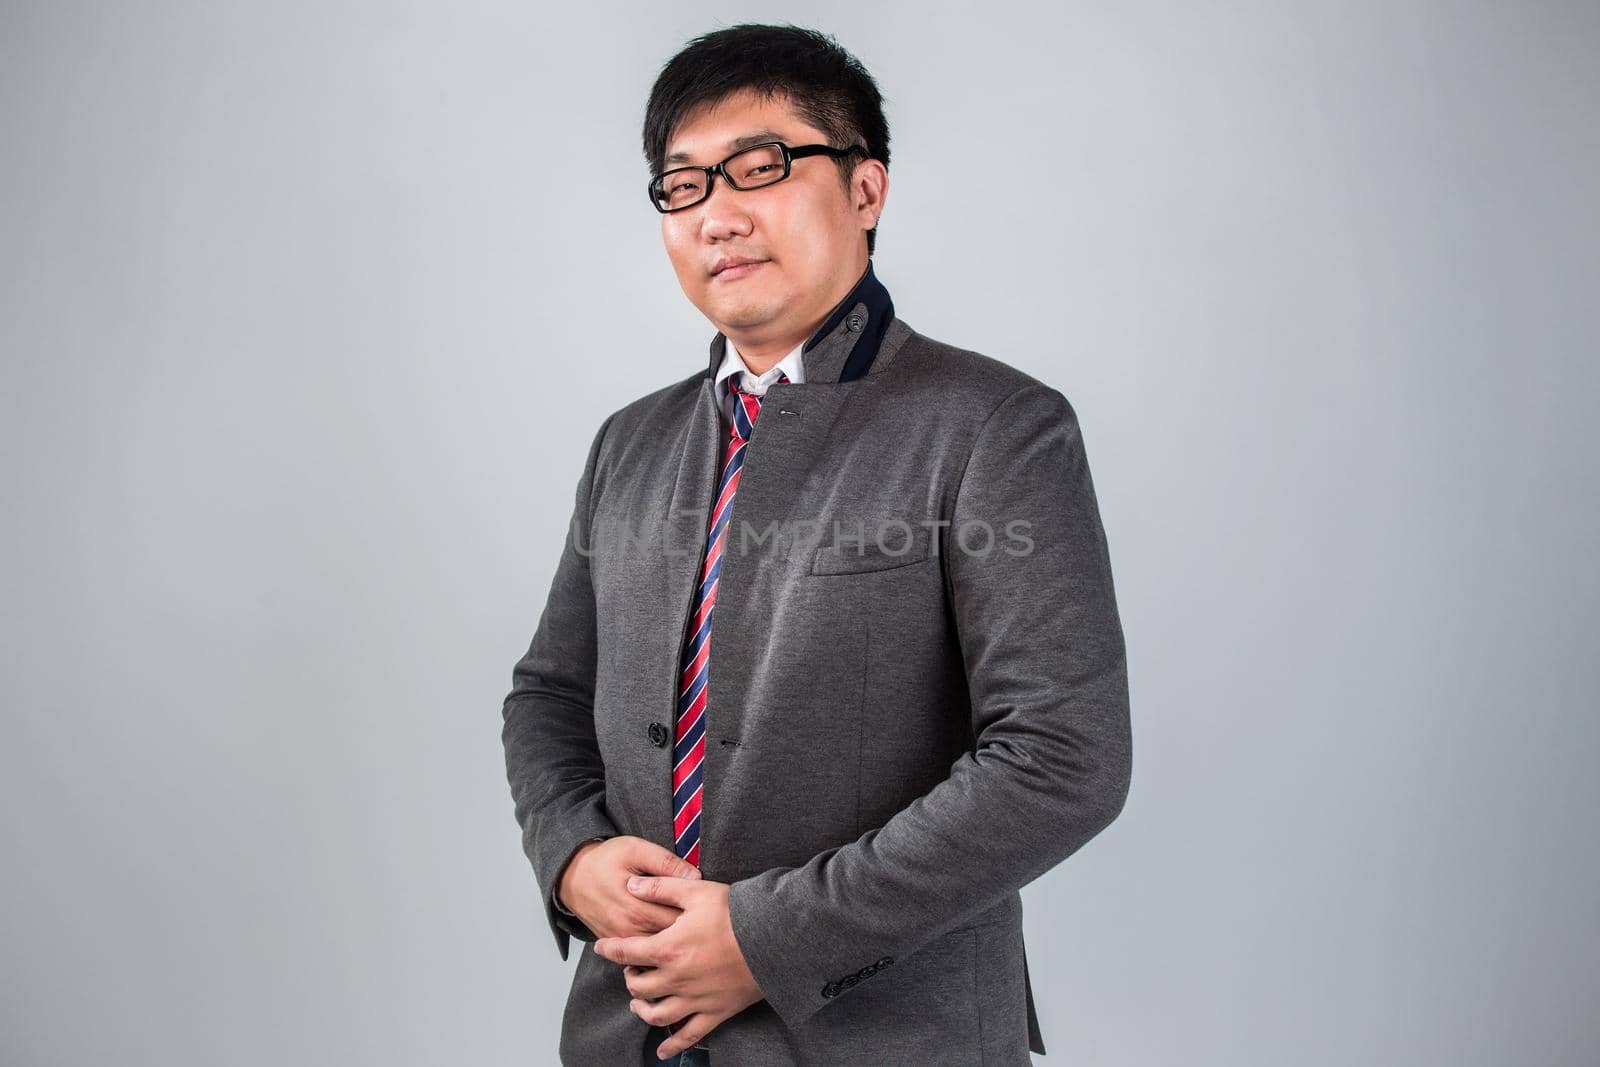 Man in suit wearing a glasses good